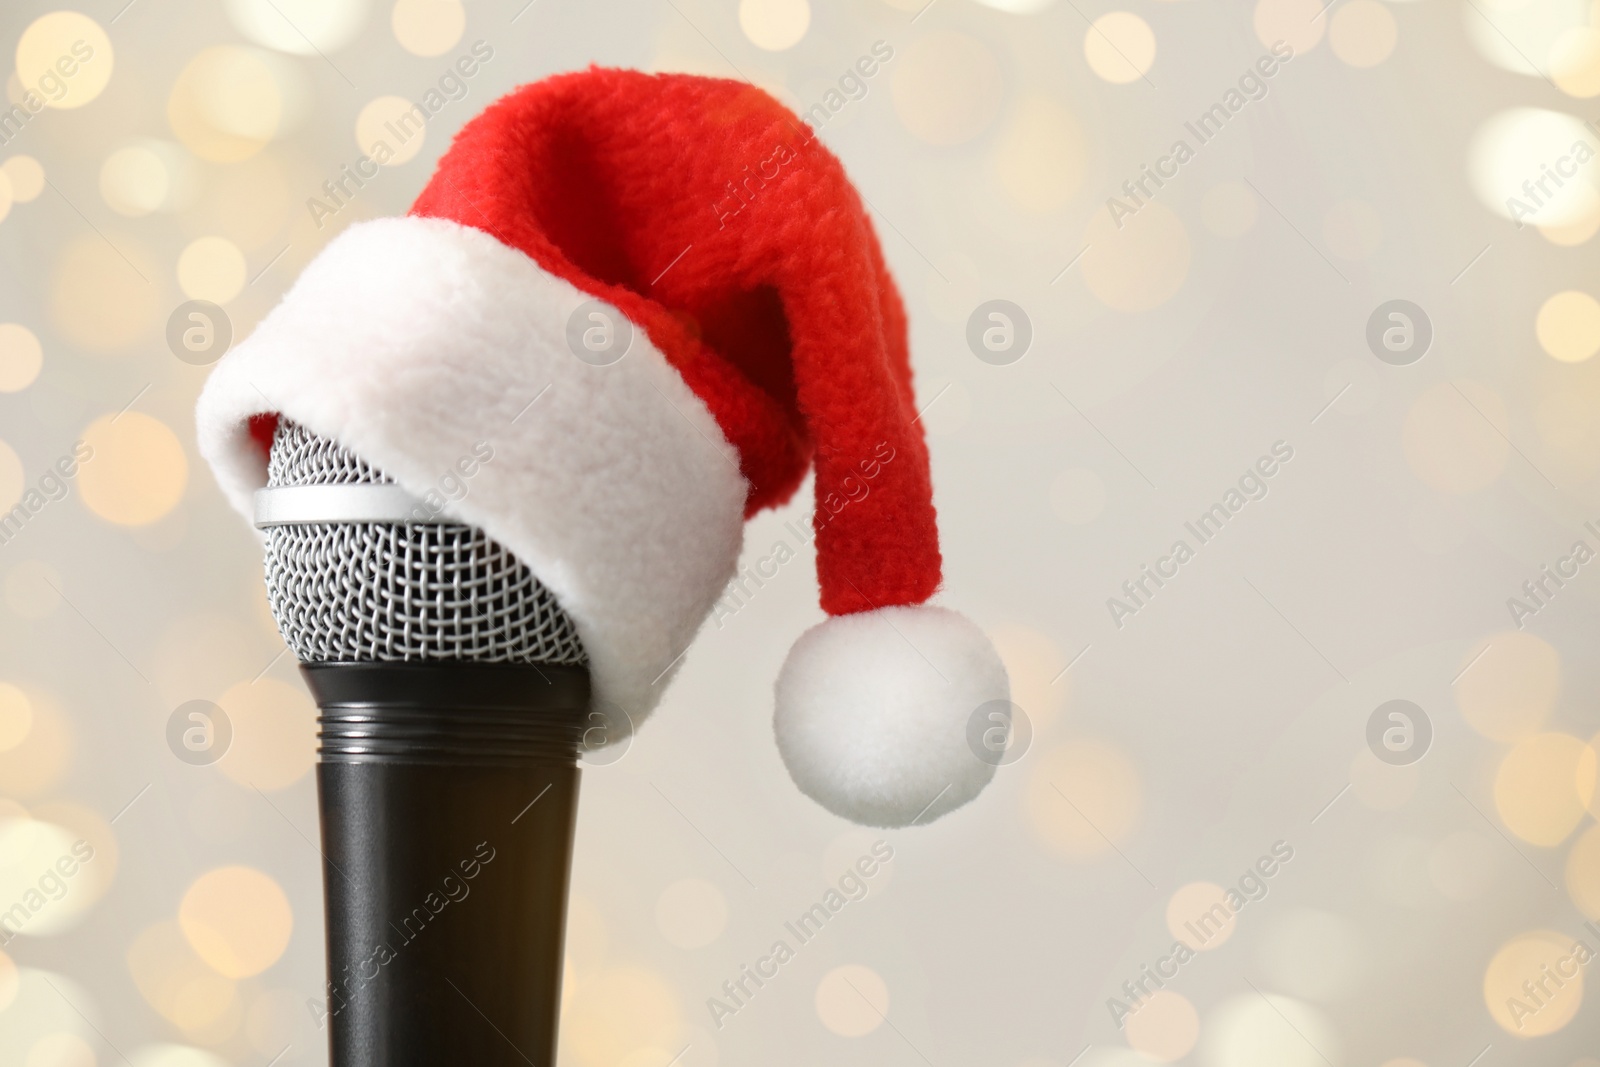 Photo of Microphone with Santa hat against blurred lights, space for text. Christmas music